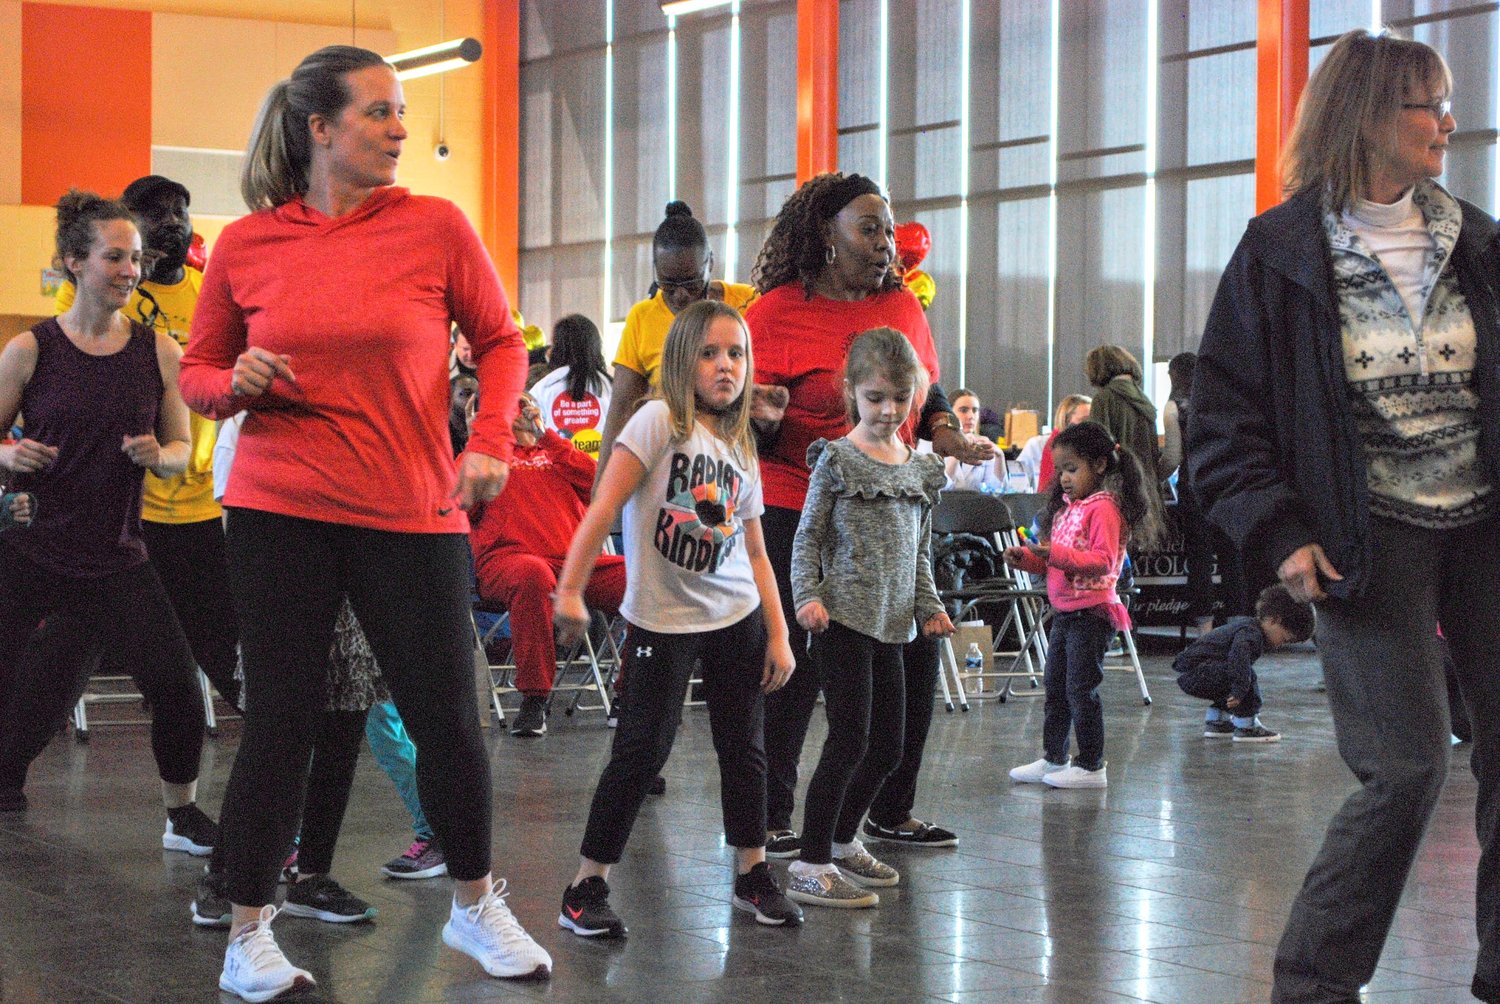 NRGETIC 4 LYFE encouraged families to participate in dance routines as part of a plan for a healthy heart.